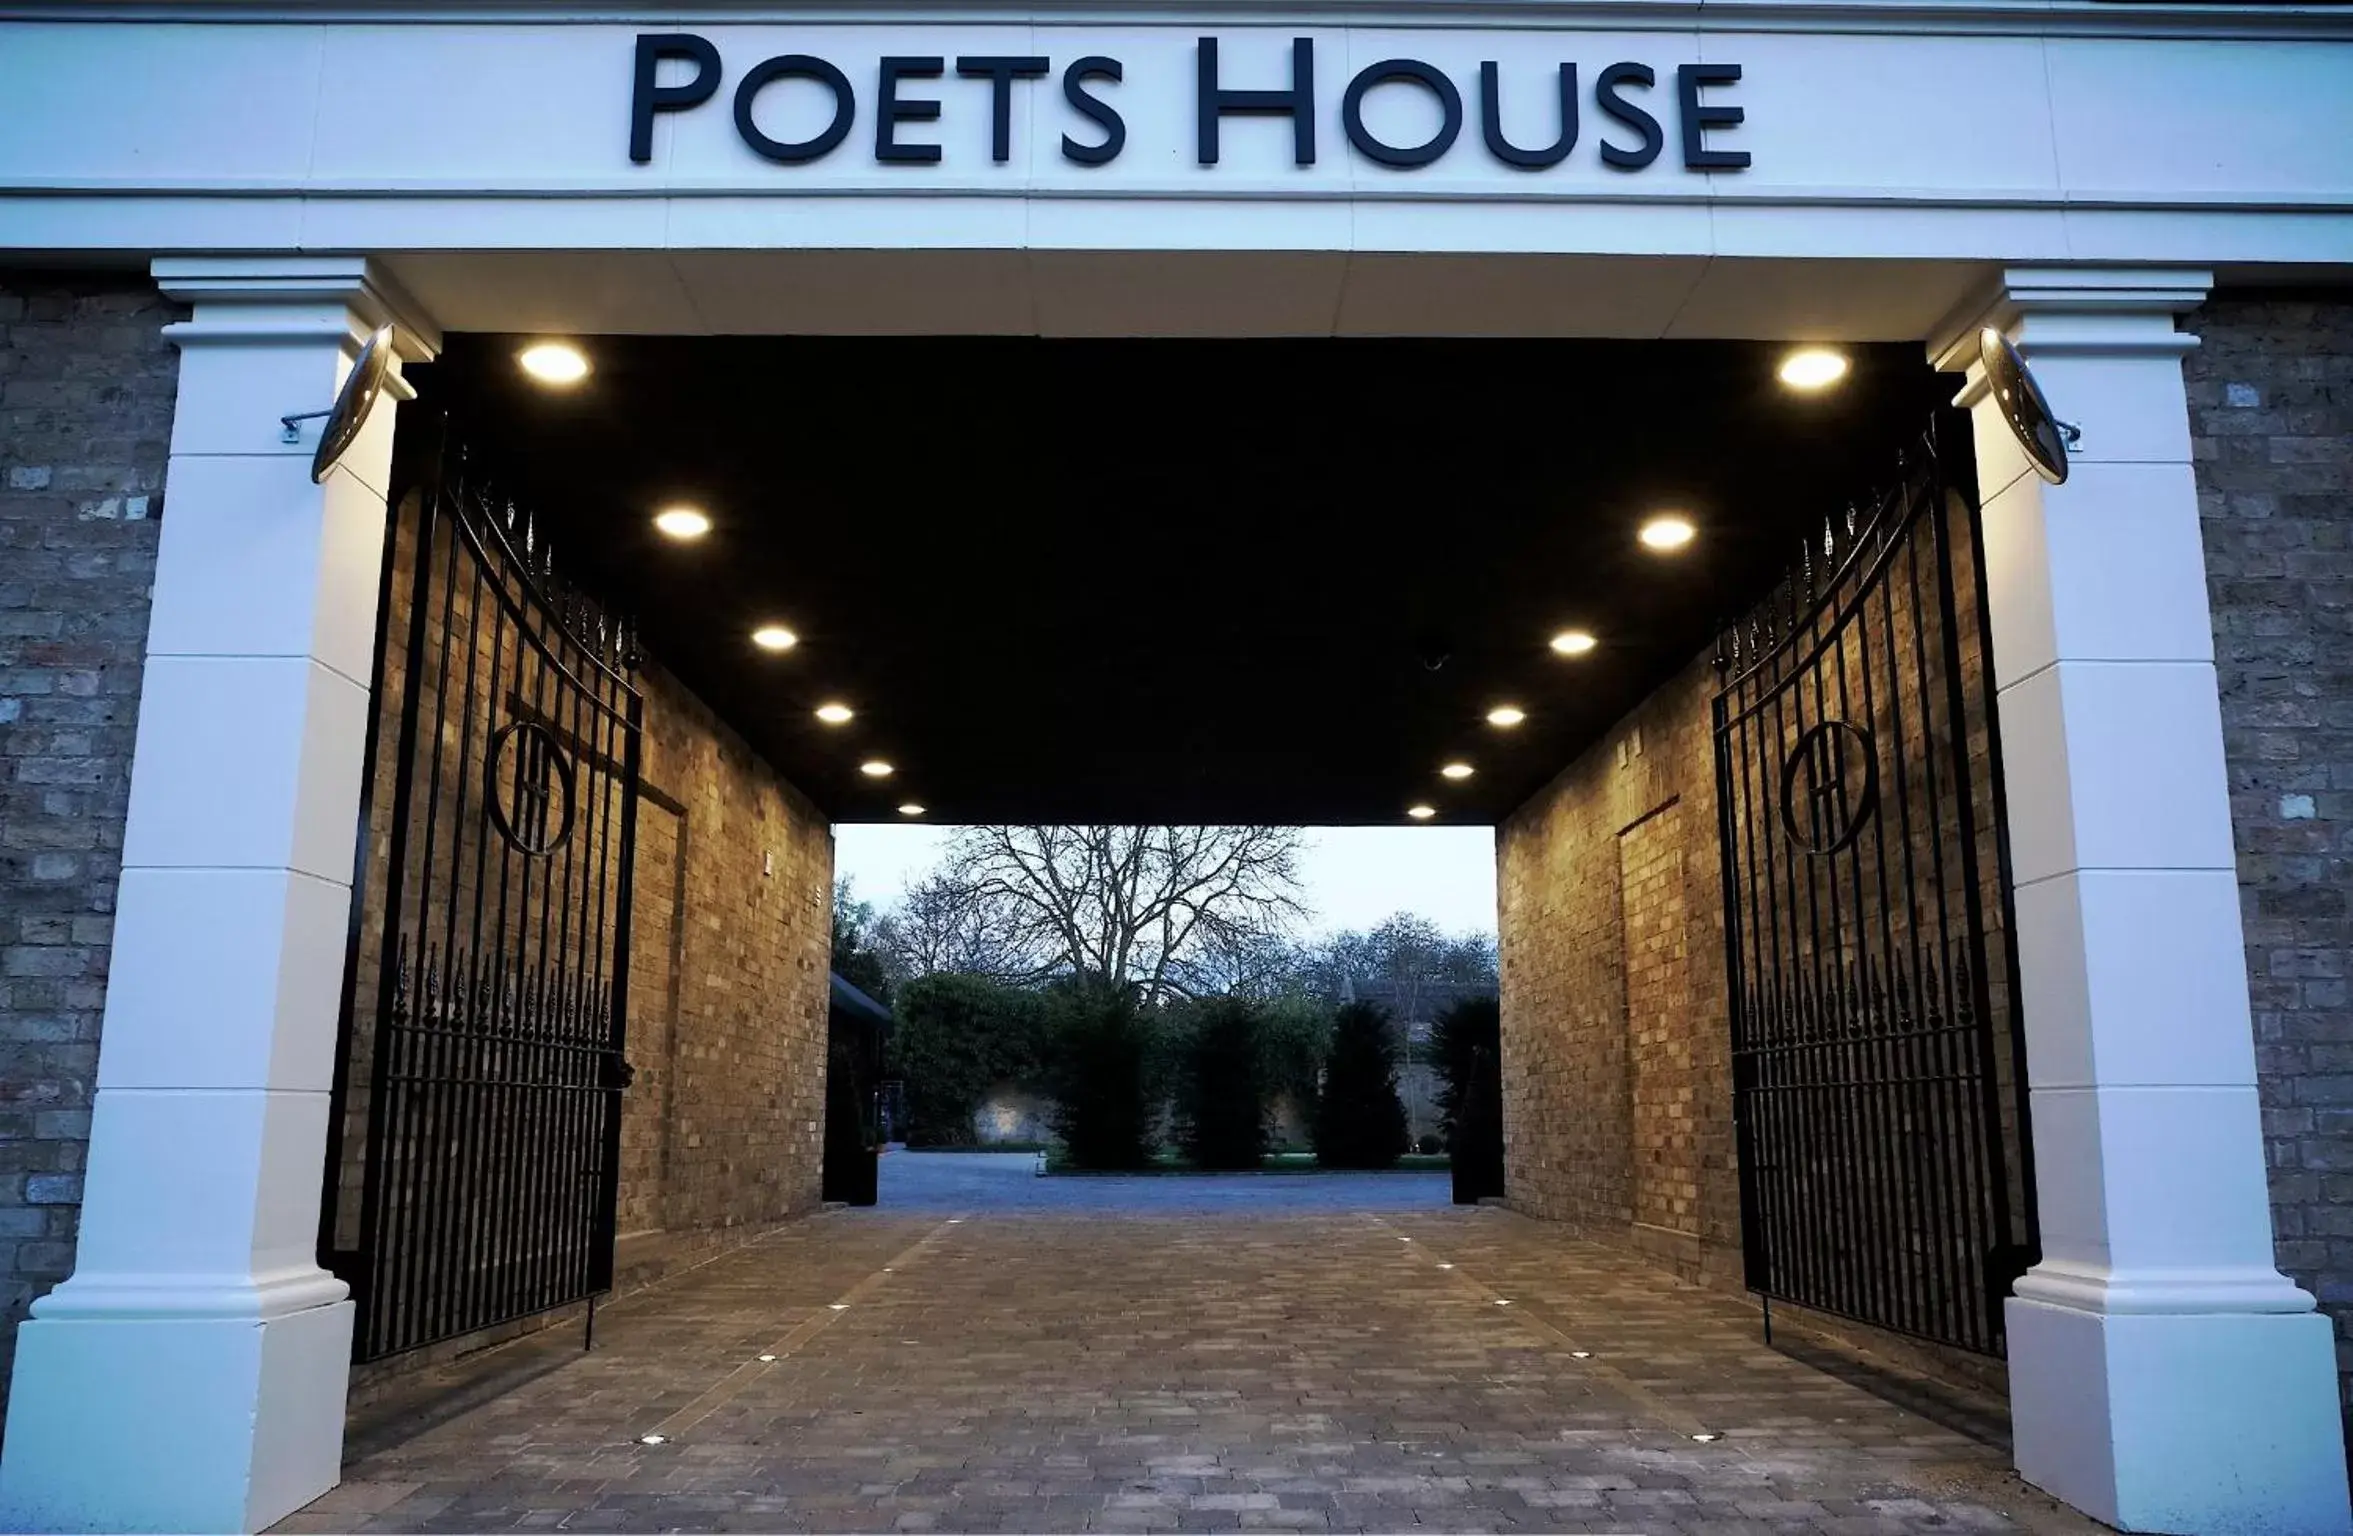 Area and facilities in Poets House